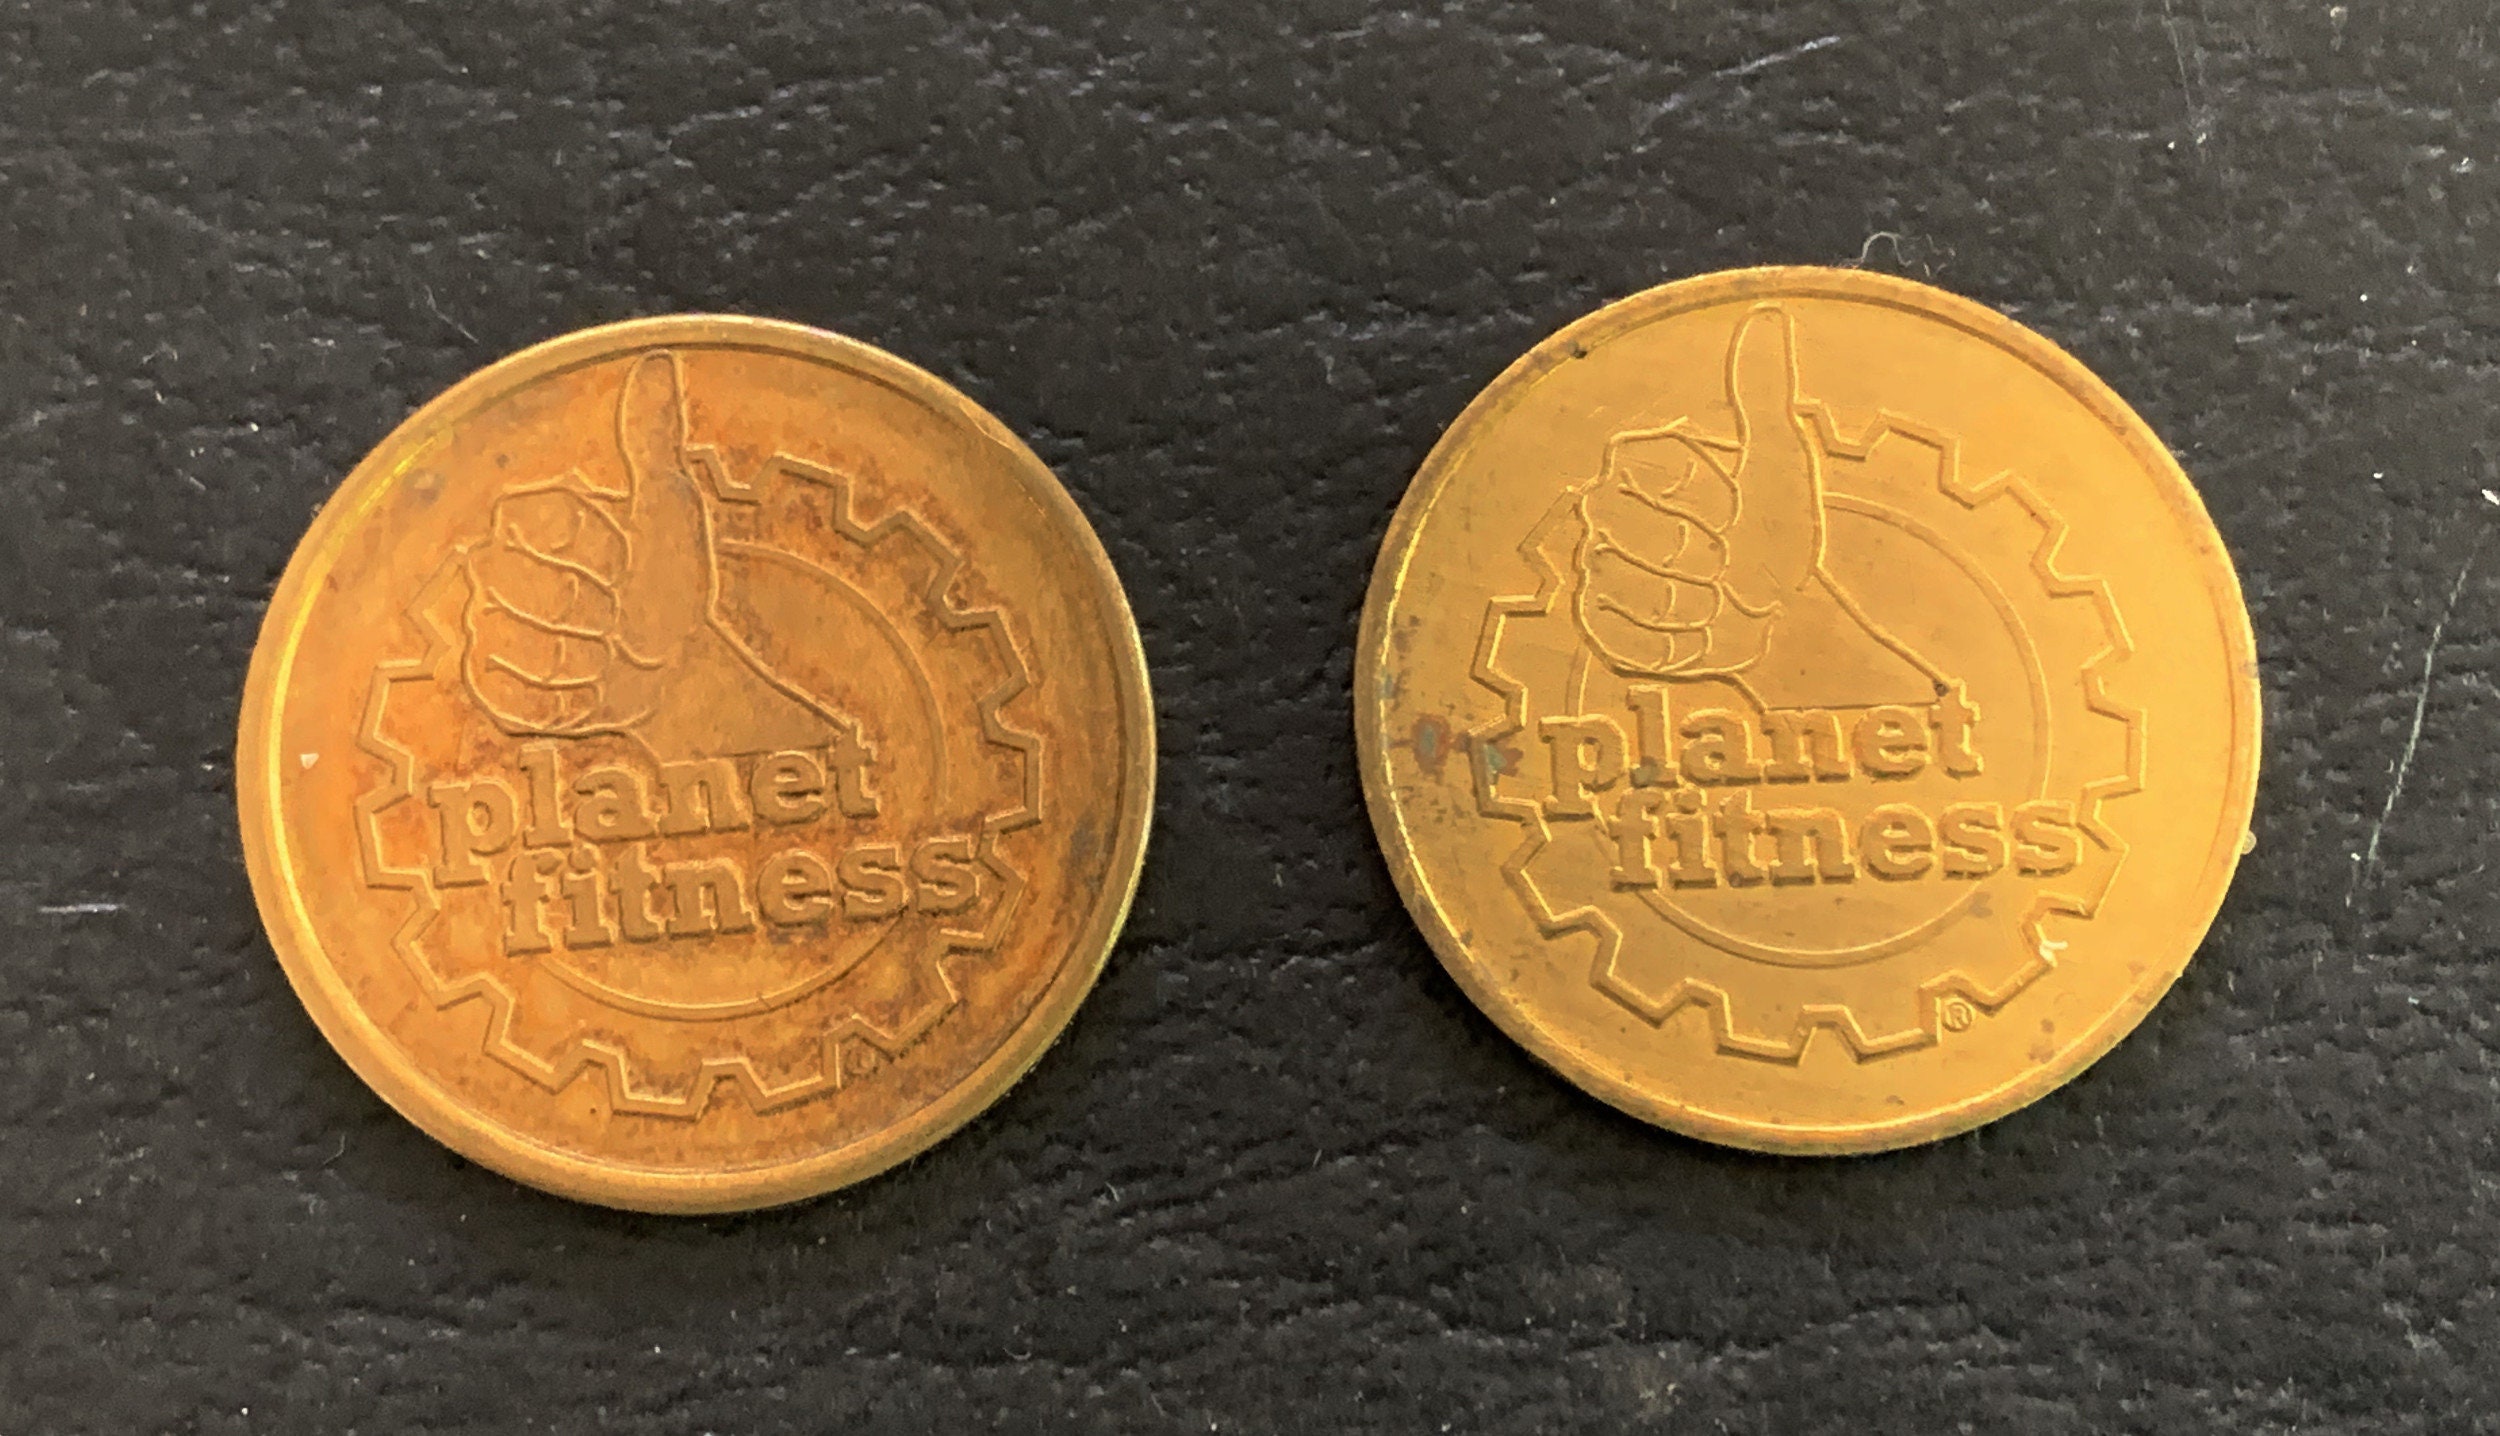 Planet Fitness Massage Coins Two Tokens Good for One Visit Each HT538